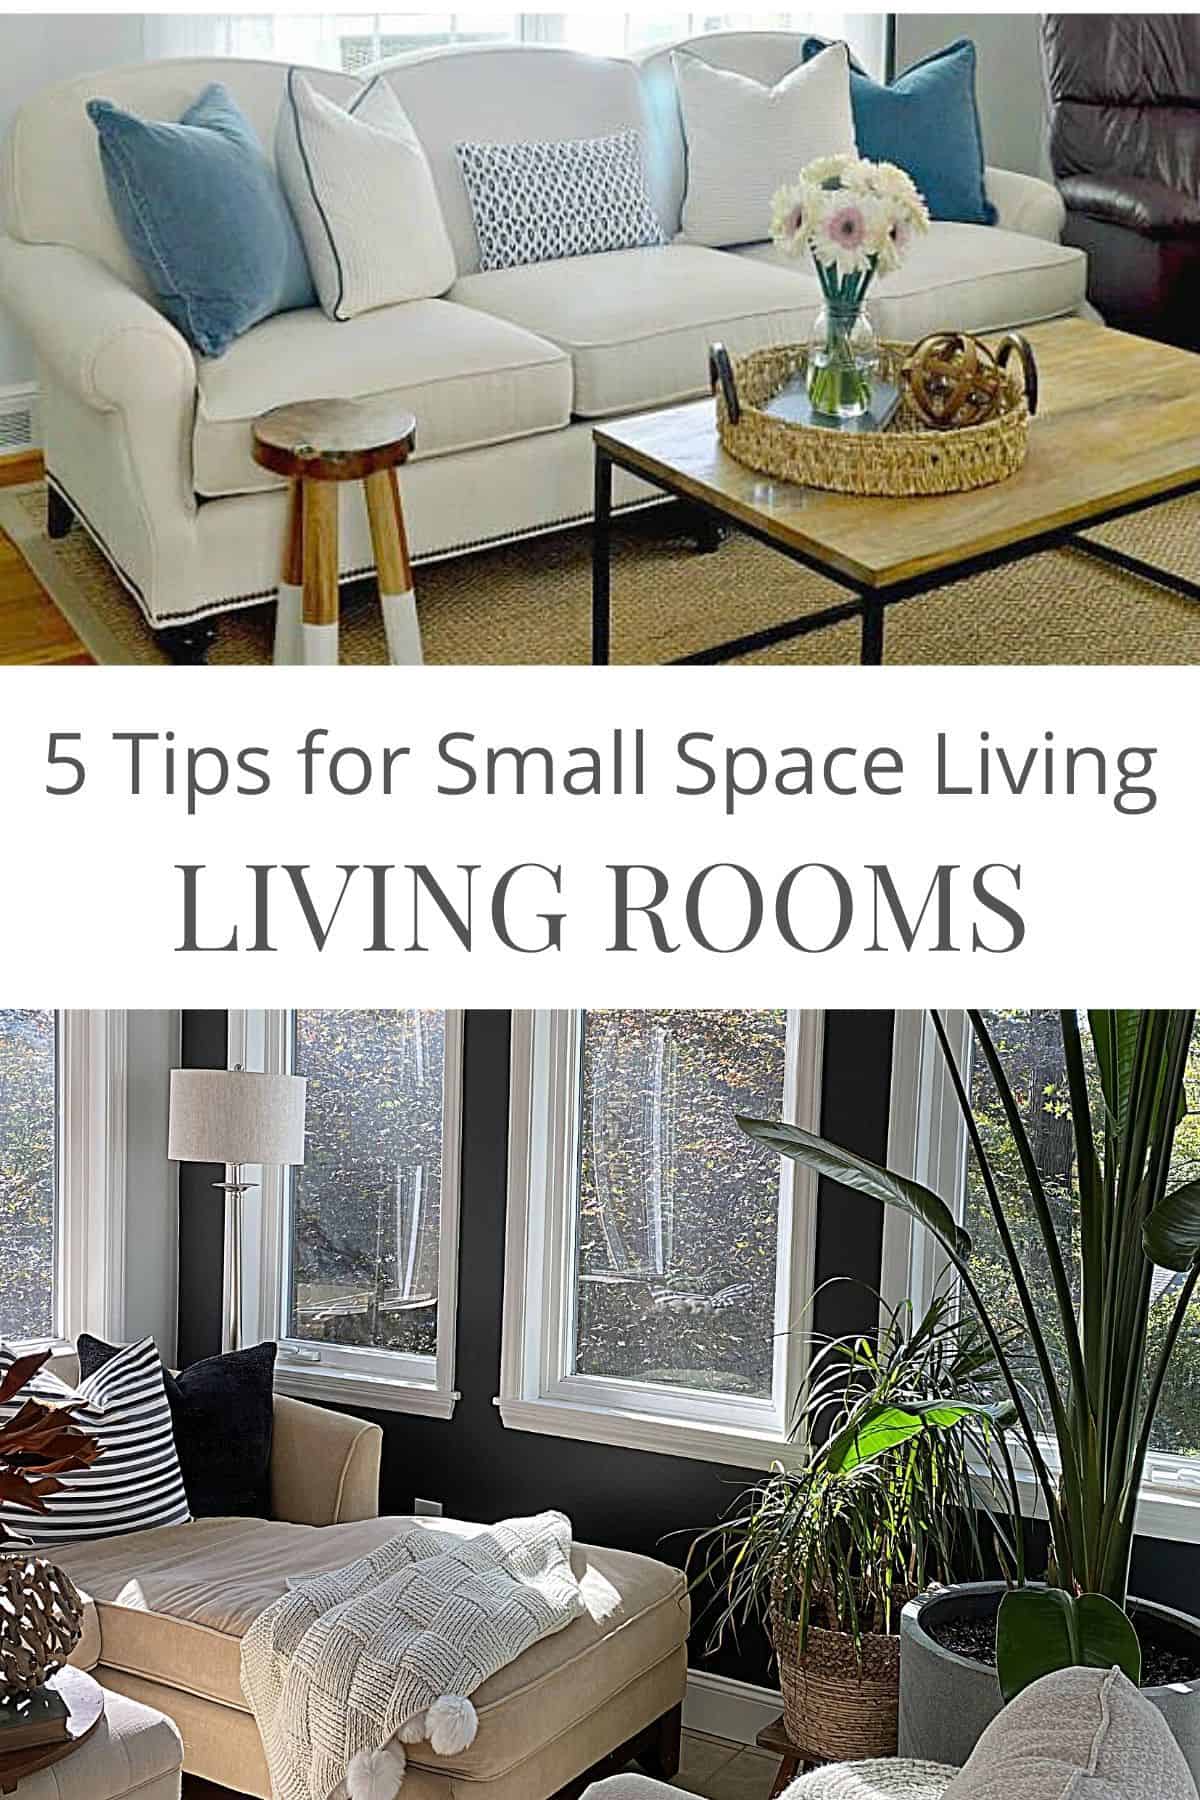 2 small living room spaces with couches